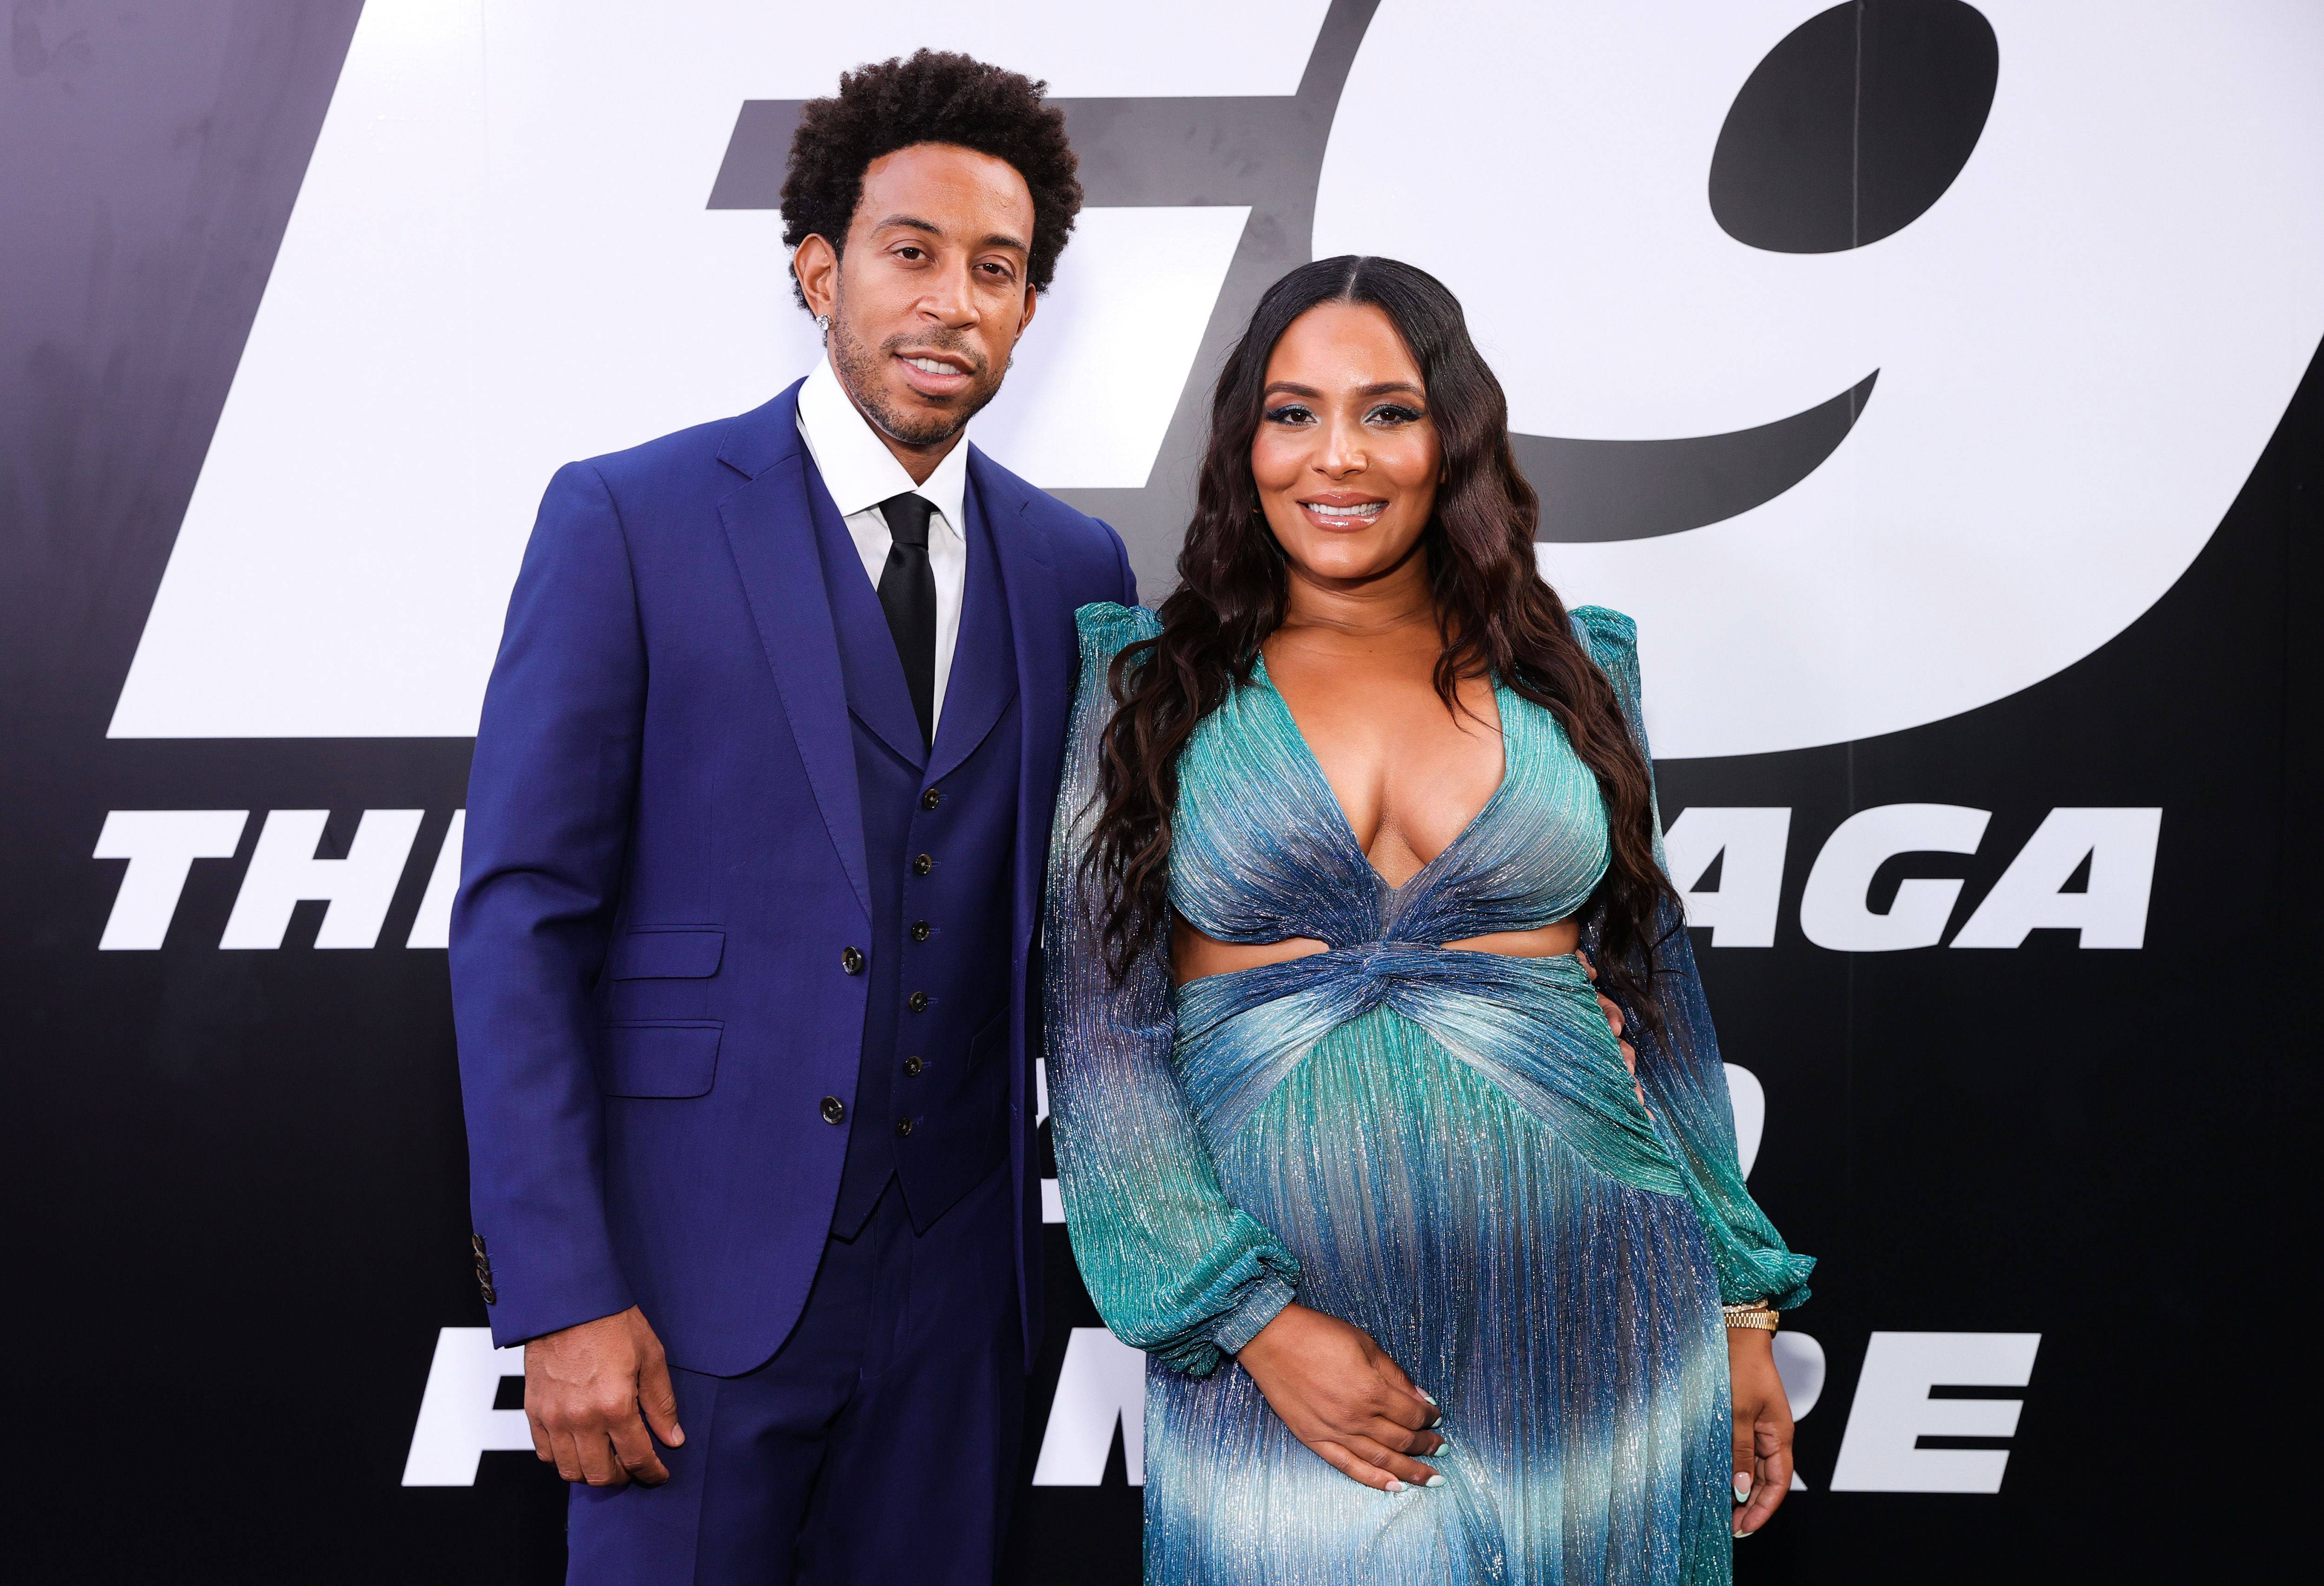 HOLLYWOOD, CALIFORNIA - JUNE 18: (L-R) Ludacris and Eudoxie Mbouguiengue attend the Universal Pictures "F9" World Premiere at TCL Chinese Theatre on June 18, 2021 in Hollywood, California. (Photo by Rich Fury/WireImage)